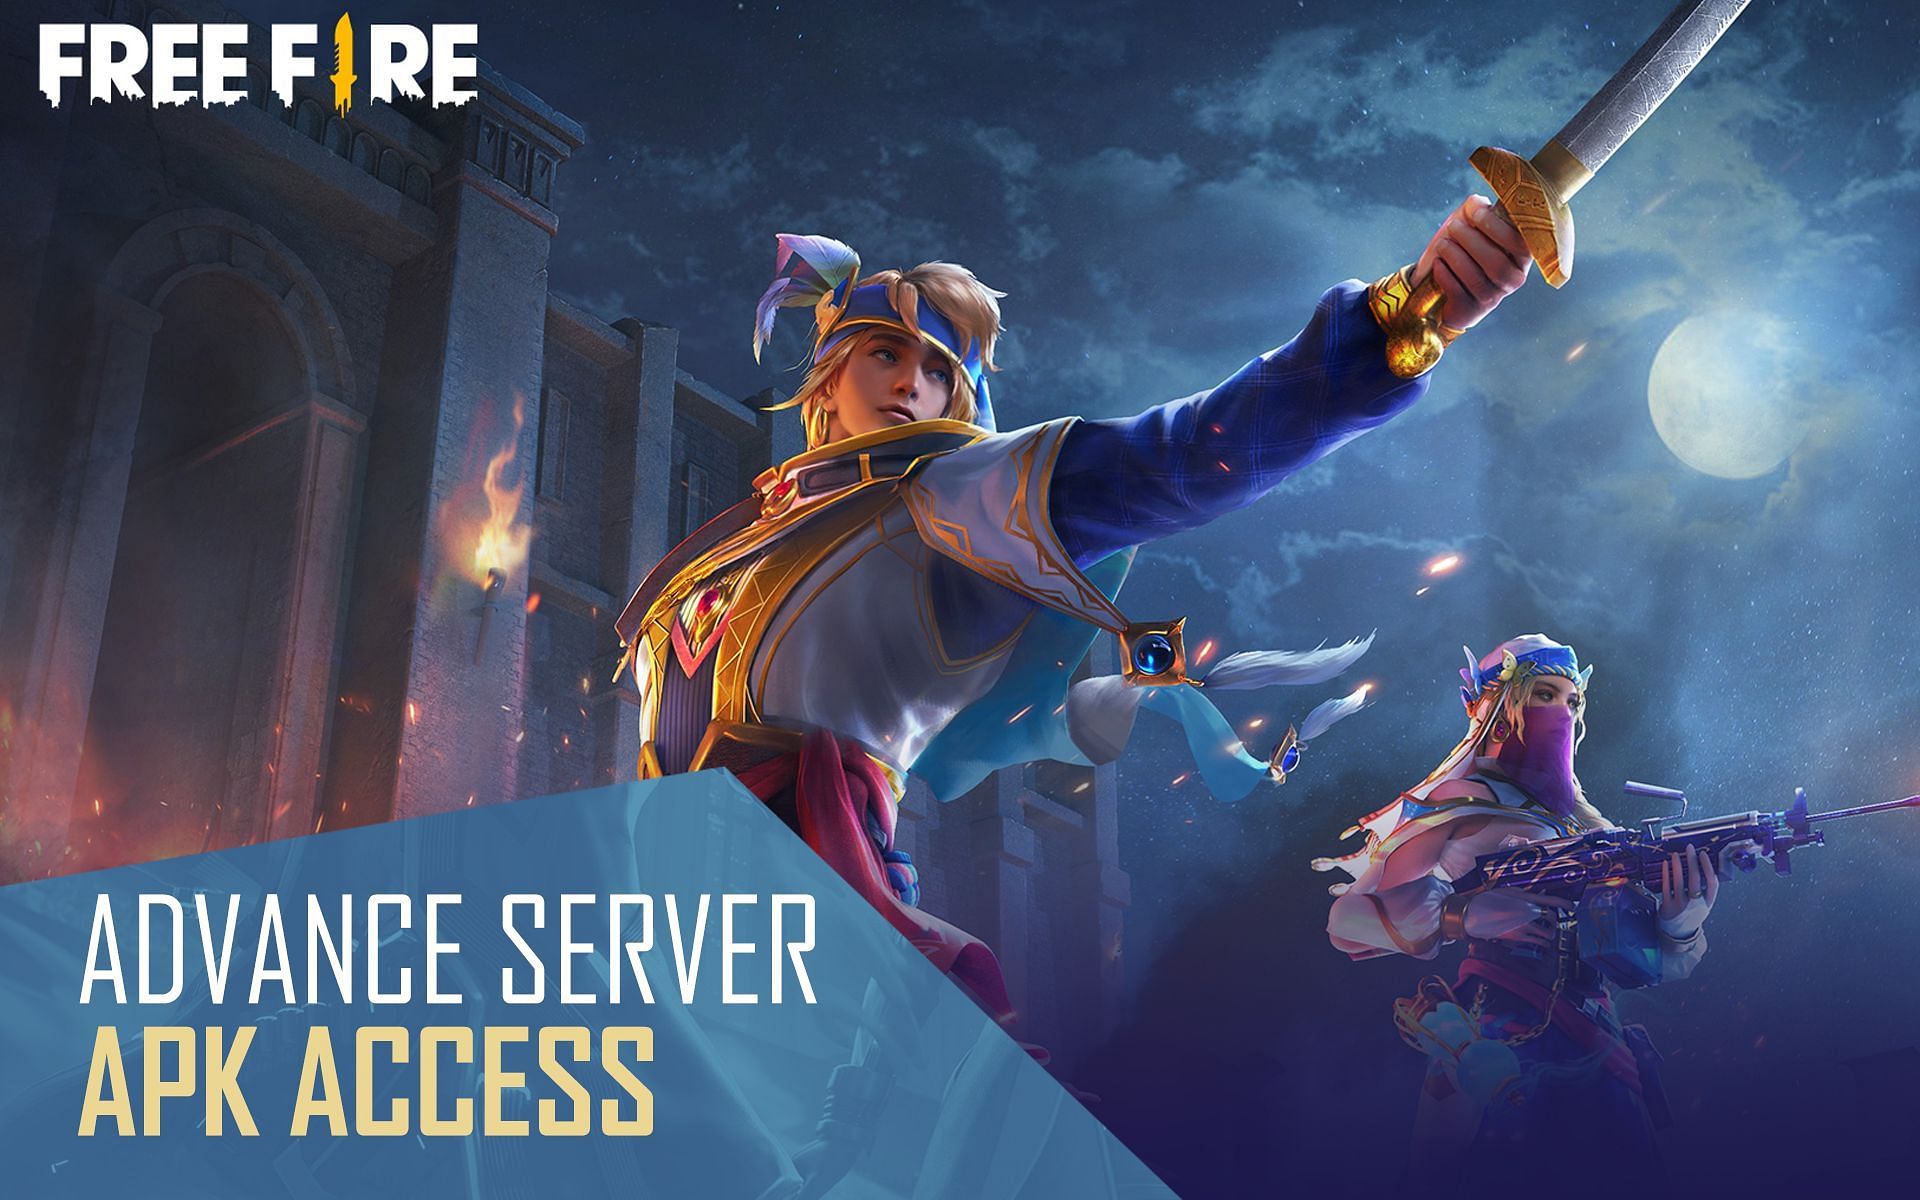 Free Fire Advance Server OB35: How To Gain Early Access And Play